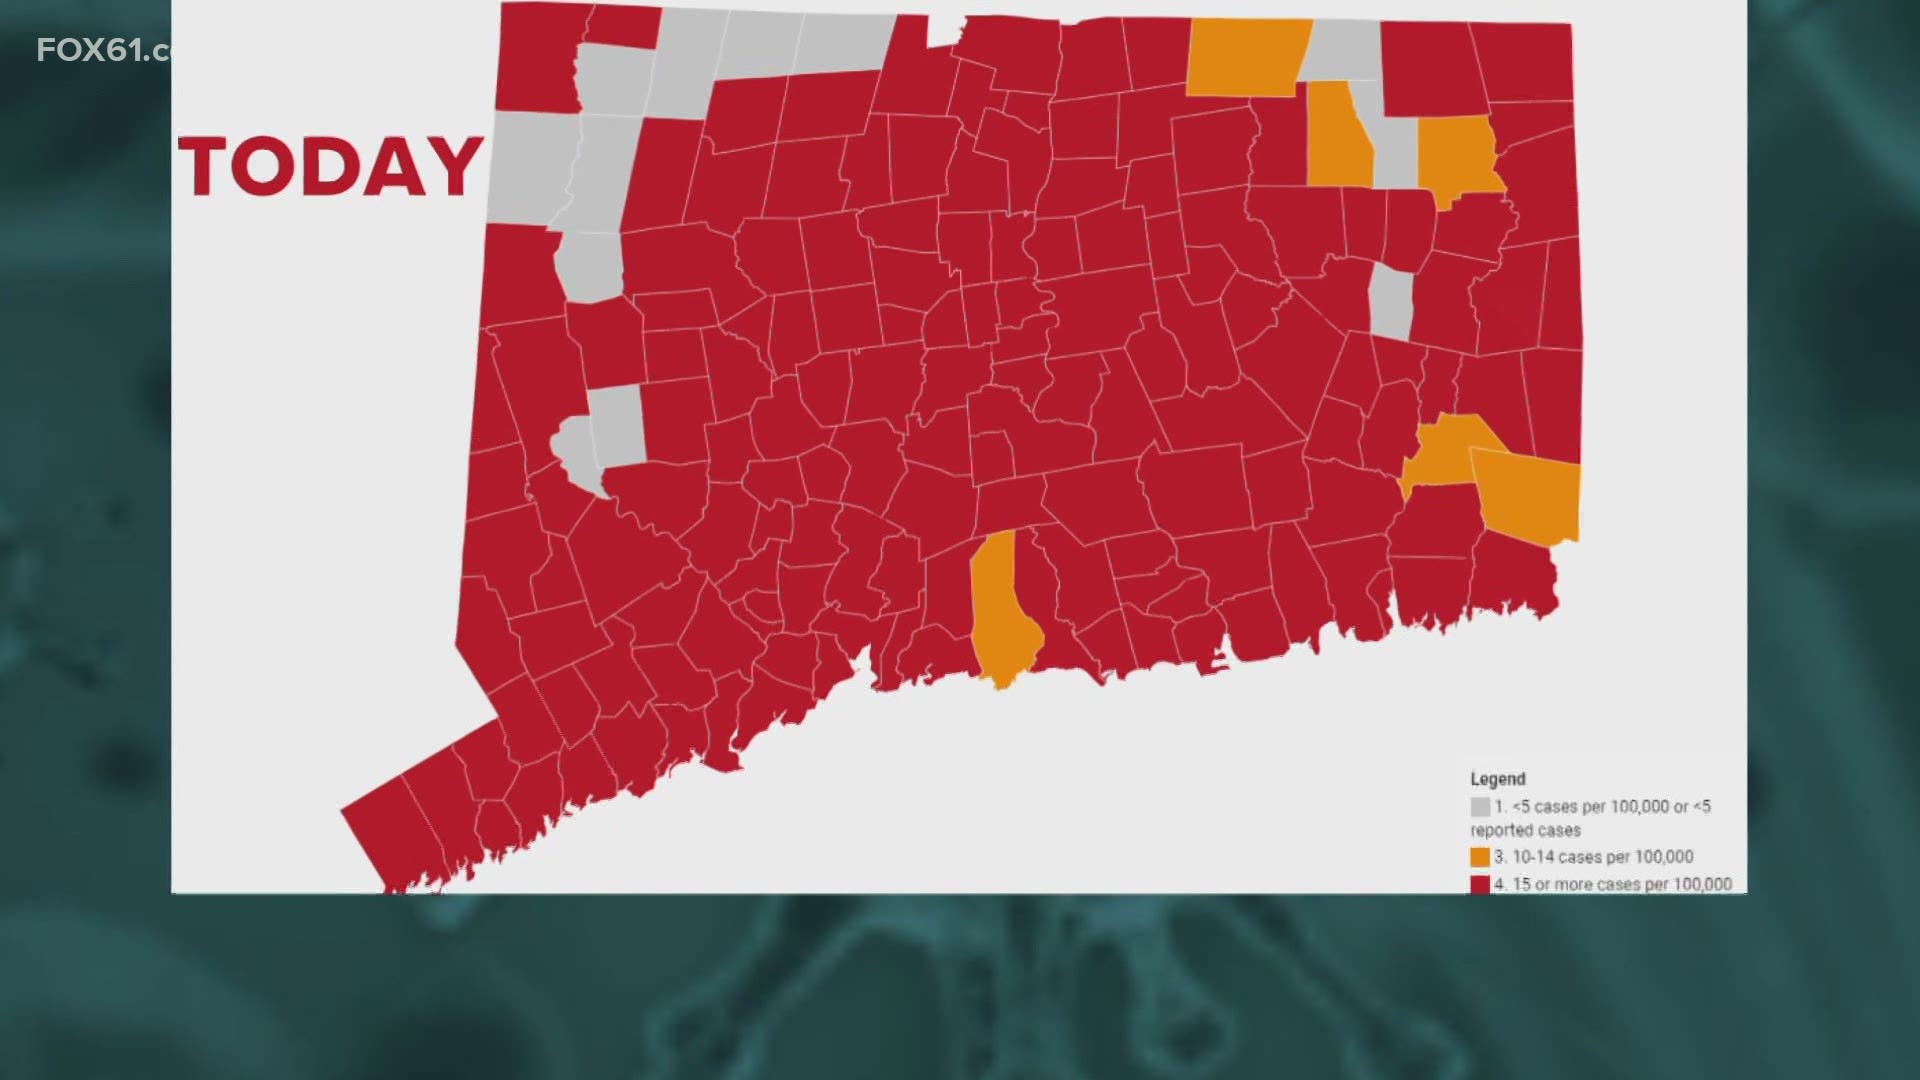 Most of Connecticut's towns have been issued a COVID-19 red alert status due to the high number of cases.